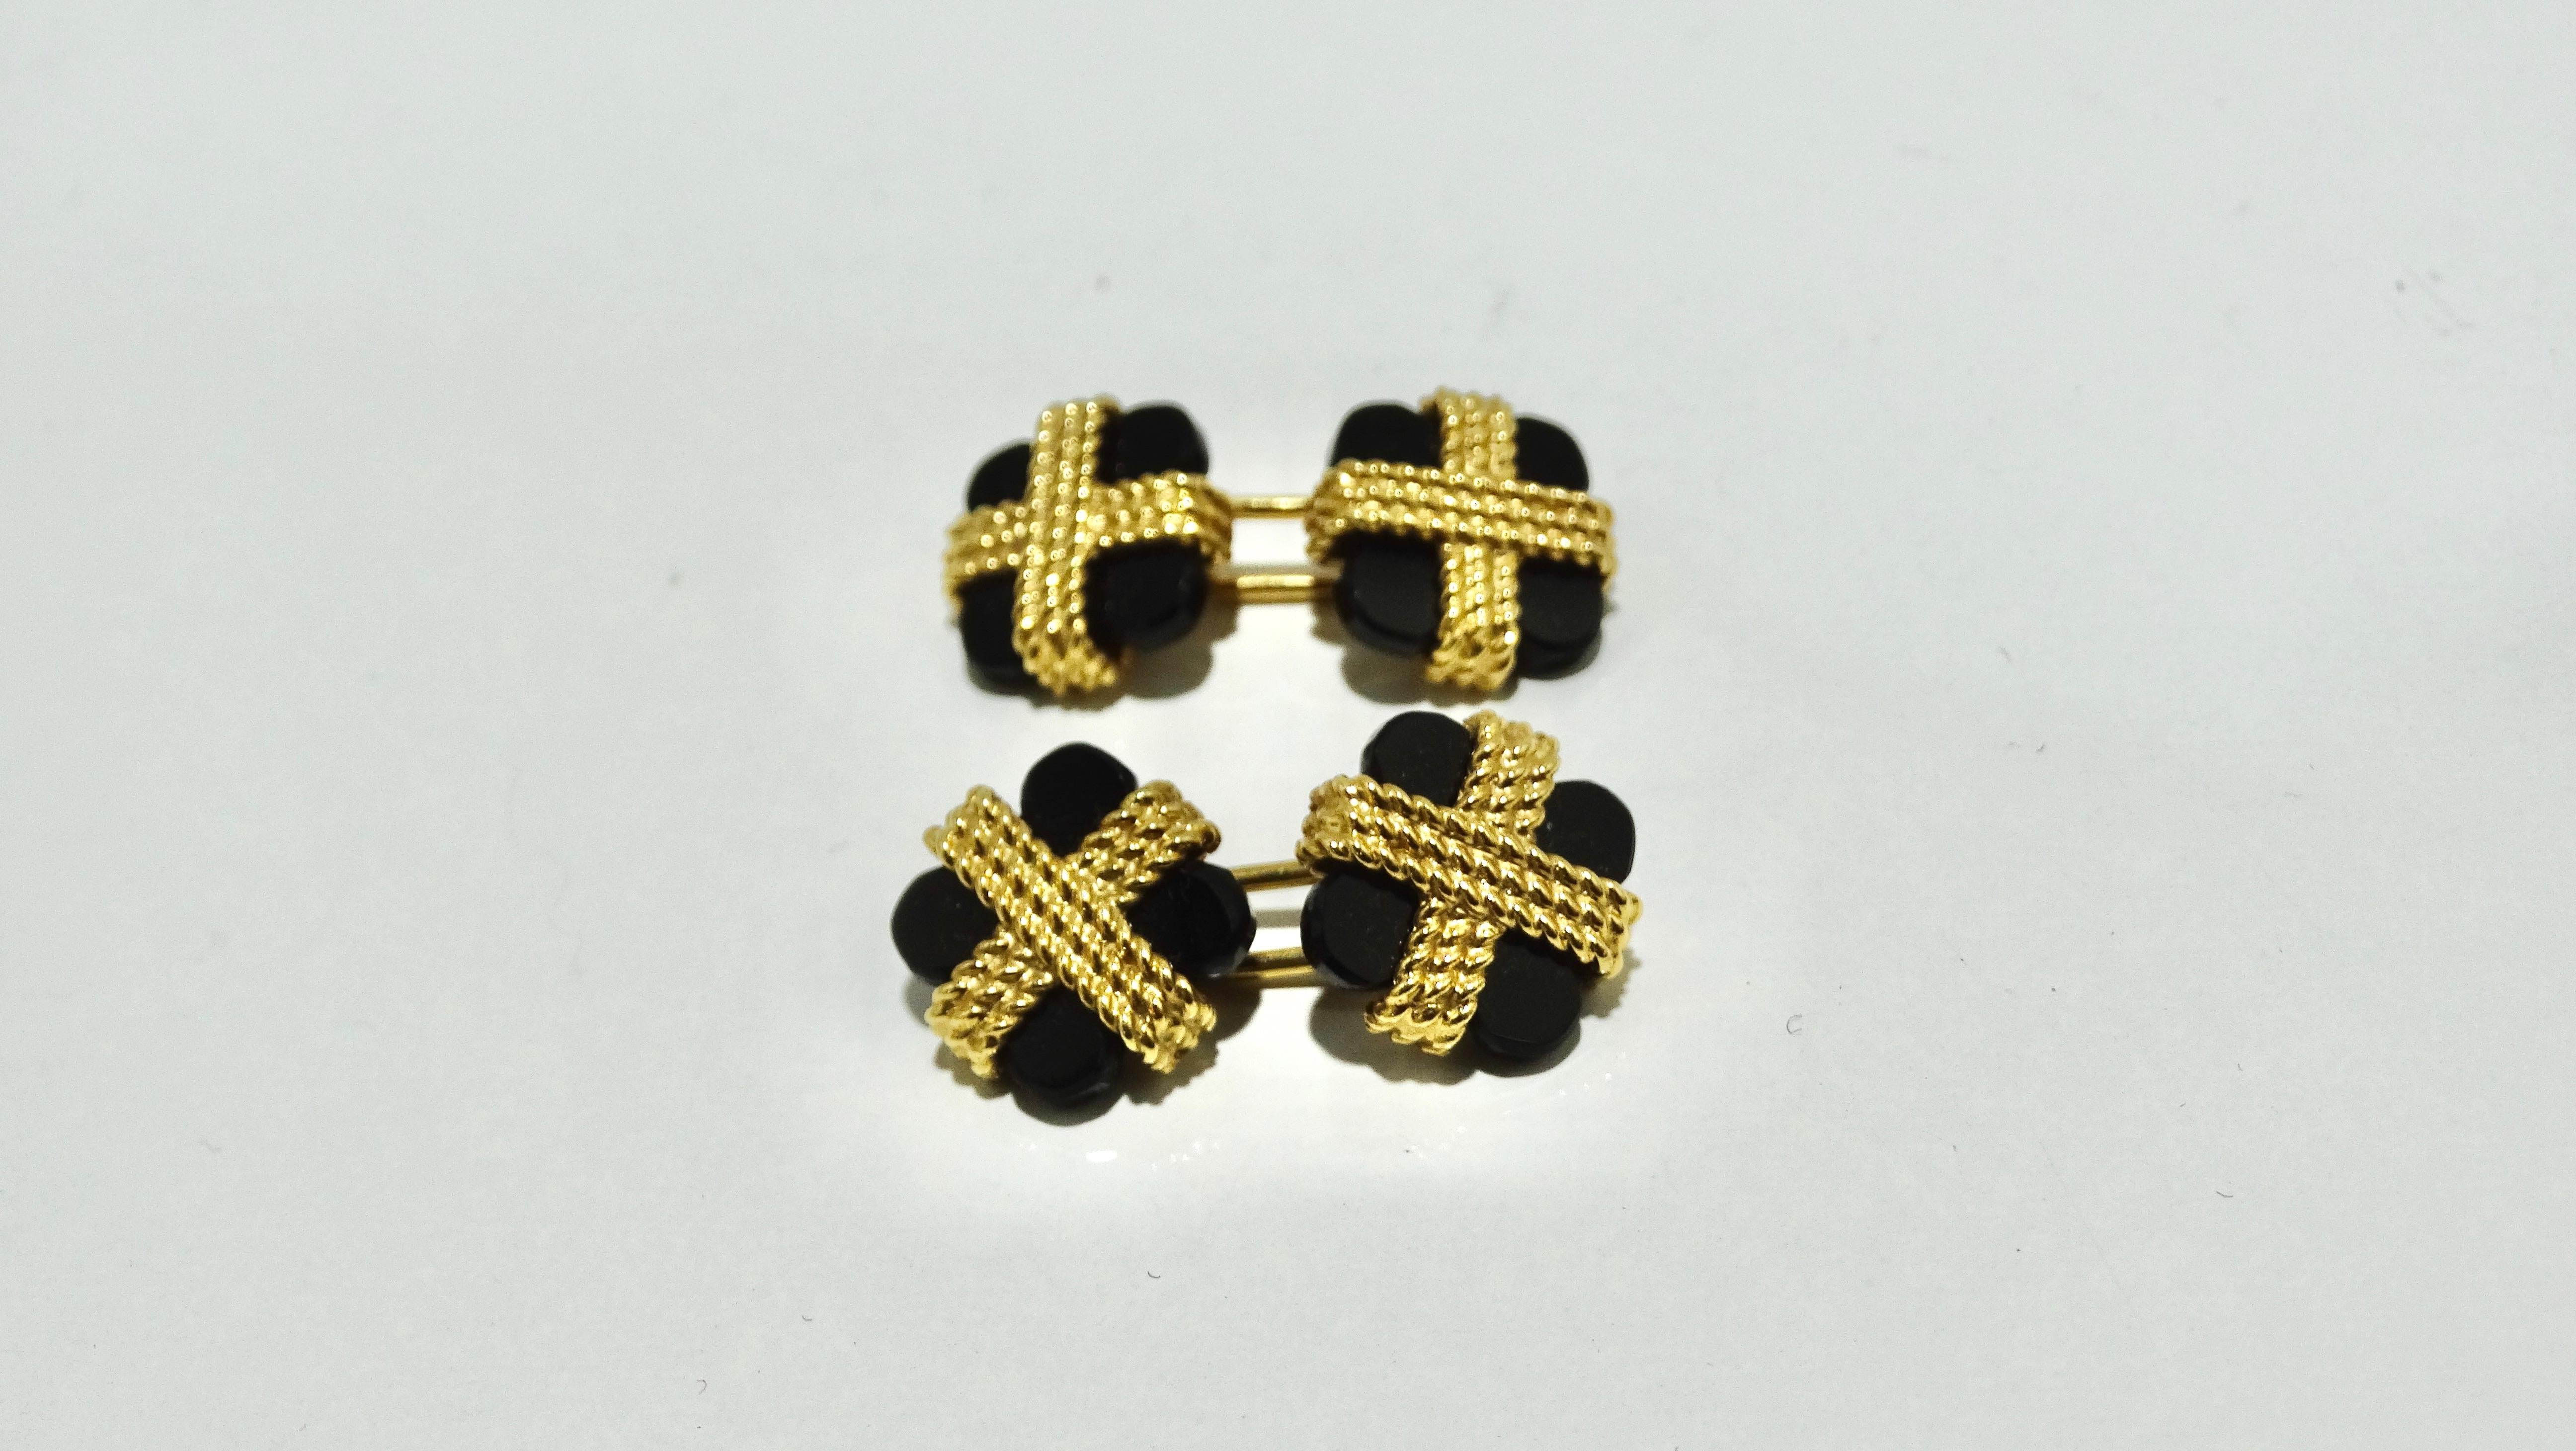 Van Cleef & Arpels 18k Yellow Gold Rope Onyx Cufflinks In Excellent Condition For Sale In Scottsdale, AZ